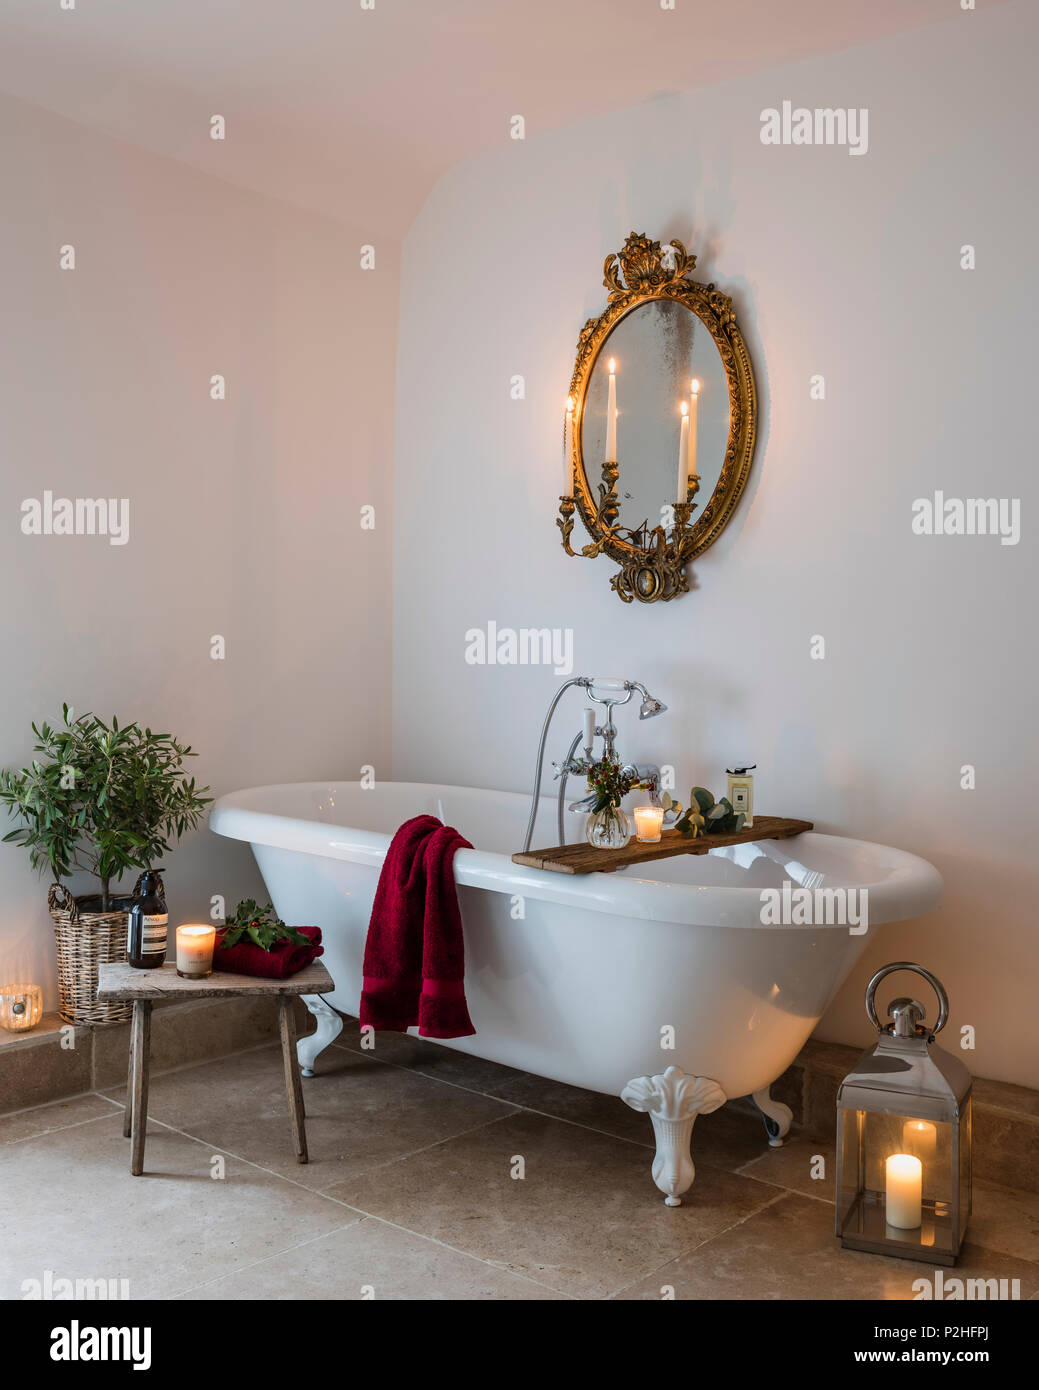 Antique gilt mirror in bathroom with free standing bath tub, limestone floor and small wooden milking stool. Stock Photo